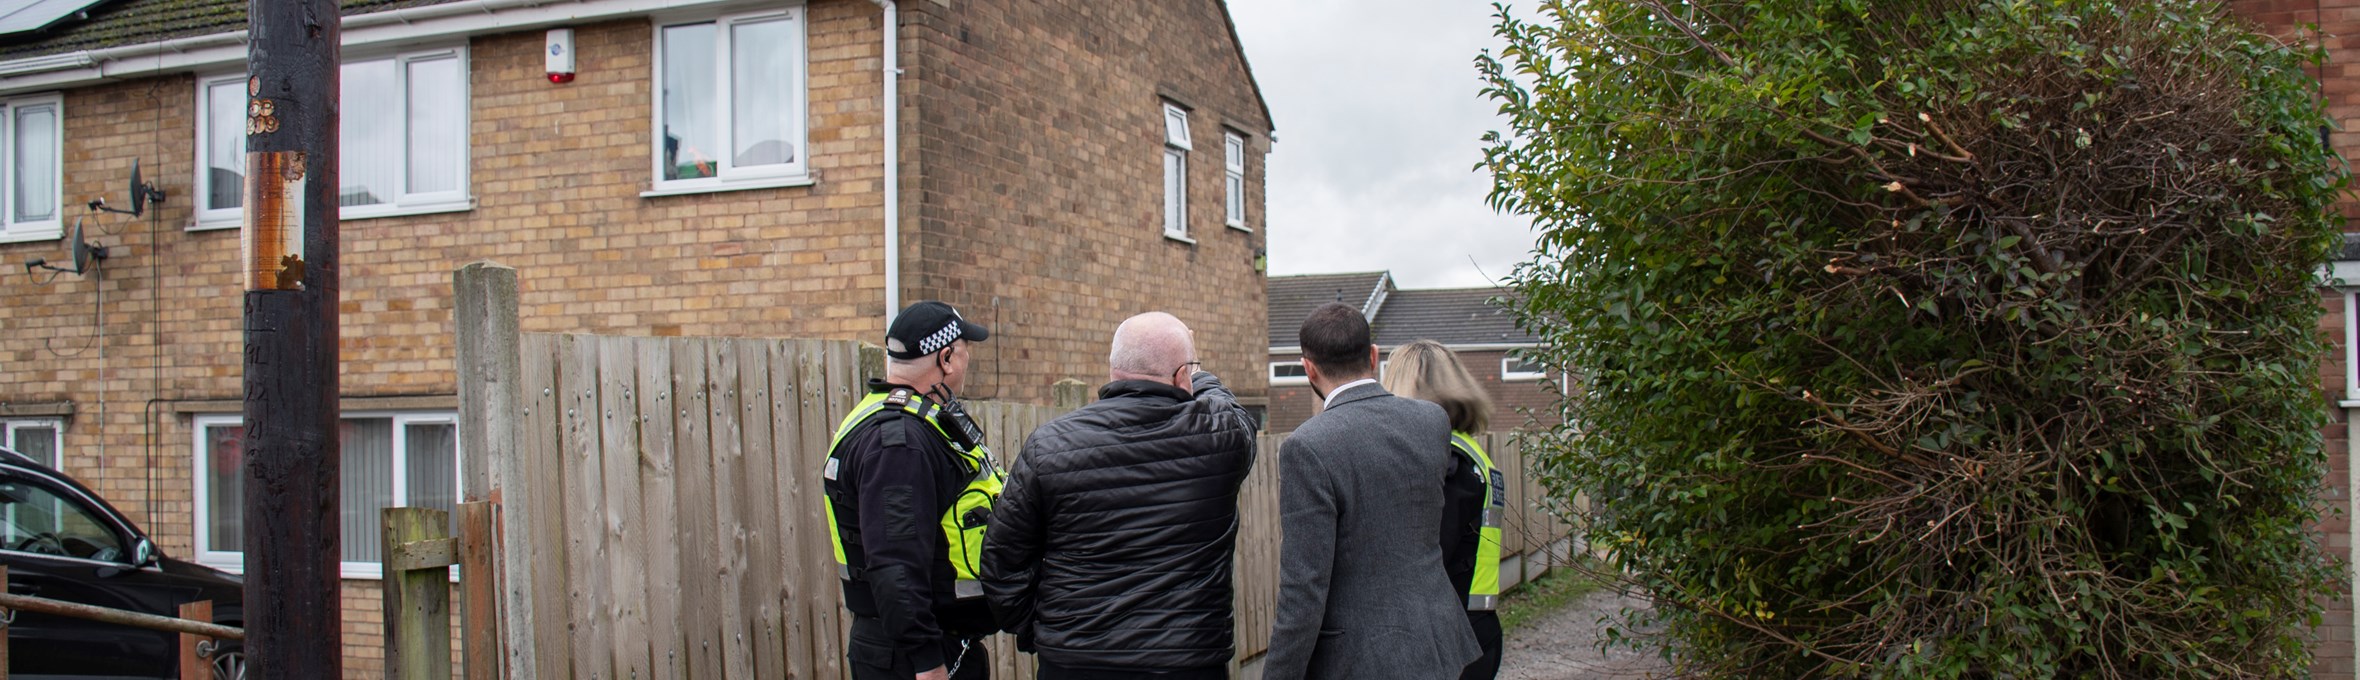 Councillors and CPOs inspect an alleyway